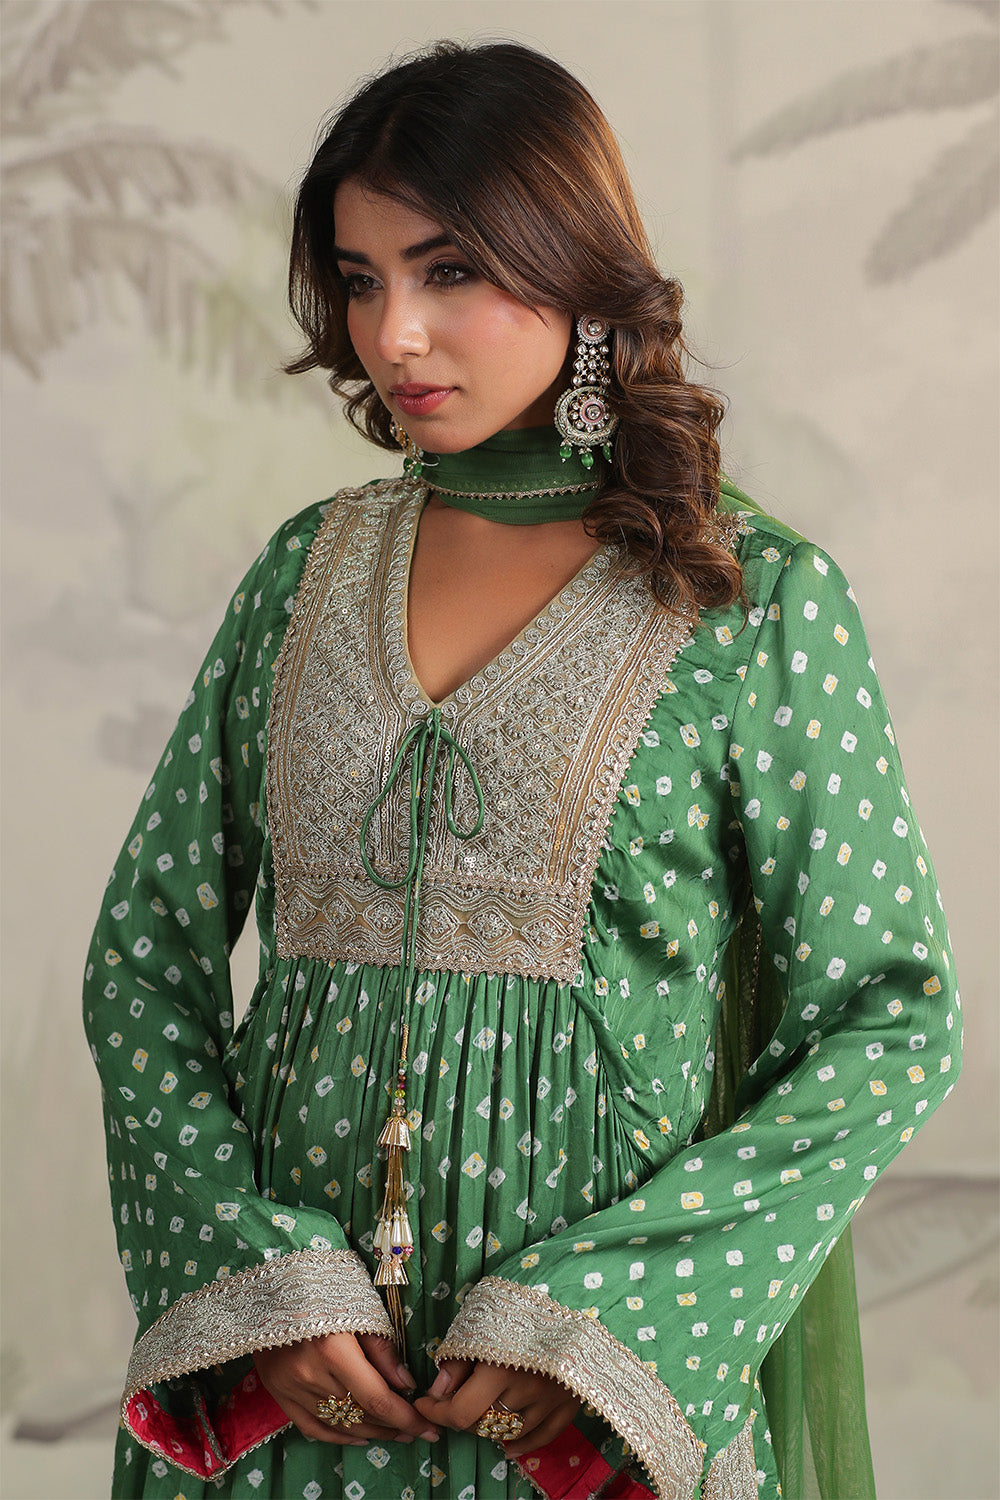 Green Color Mulberry Silk Bandhani Printed Suit